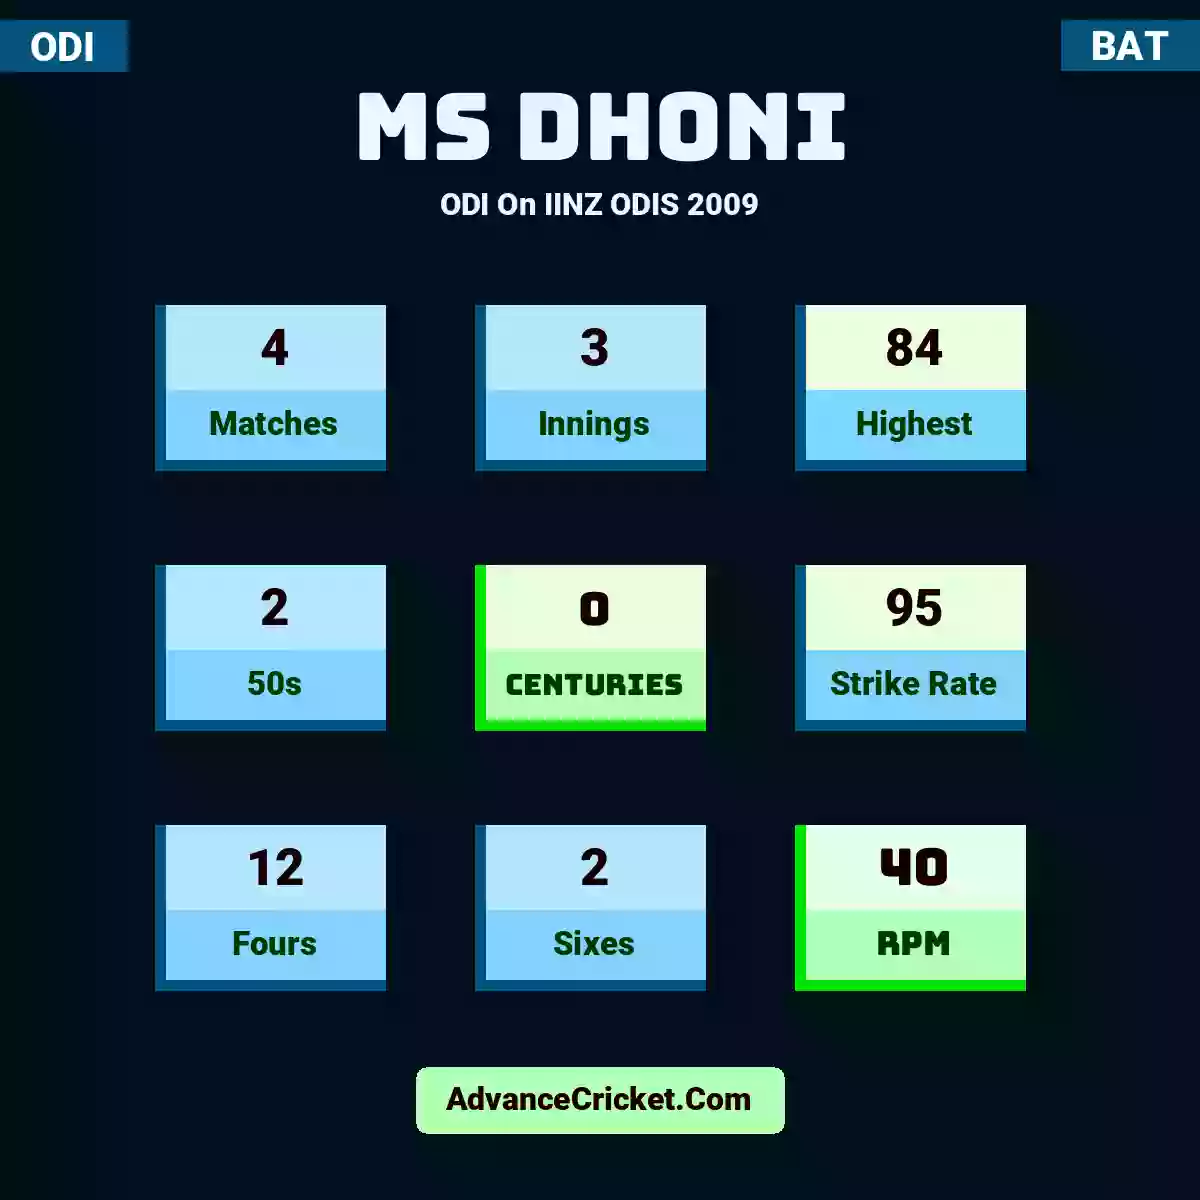 MS Dhoni ODI  On IINZ ODIS 2009, MS Dhoni played 4 matches, scored 84 runs as highest, 2 half-centuries, and 0 centuries, with a strike rate of 95. M.Dhoni hit 12 fours and 2 sixes, with an RPM of 40.